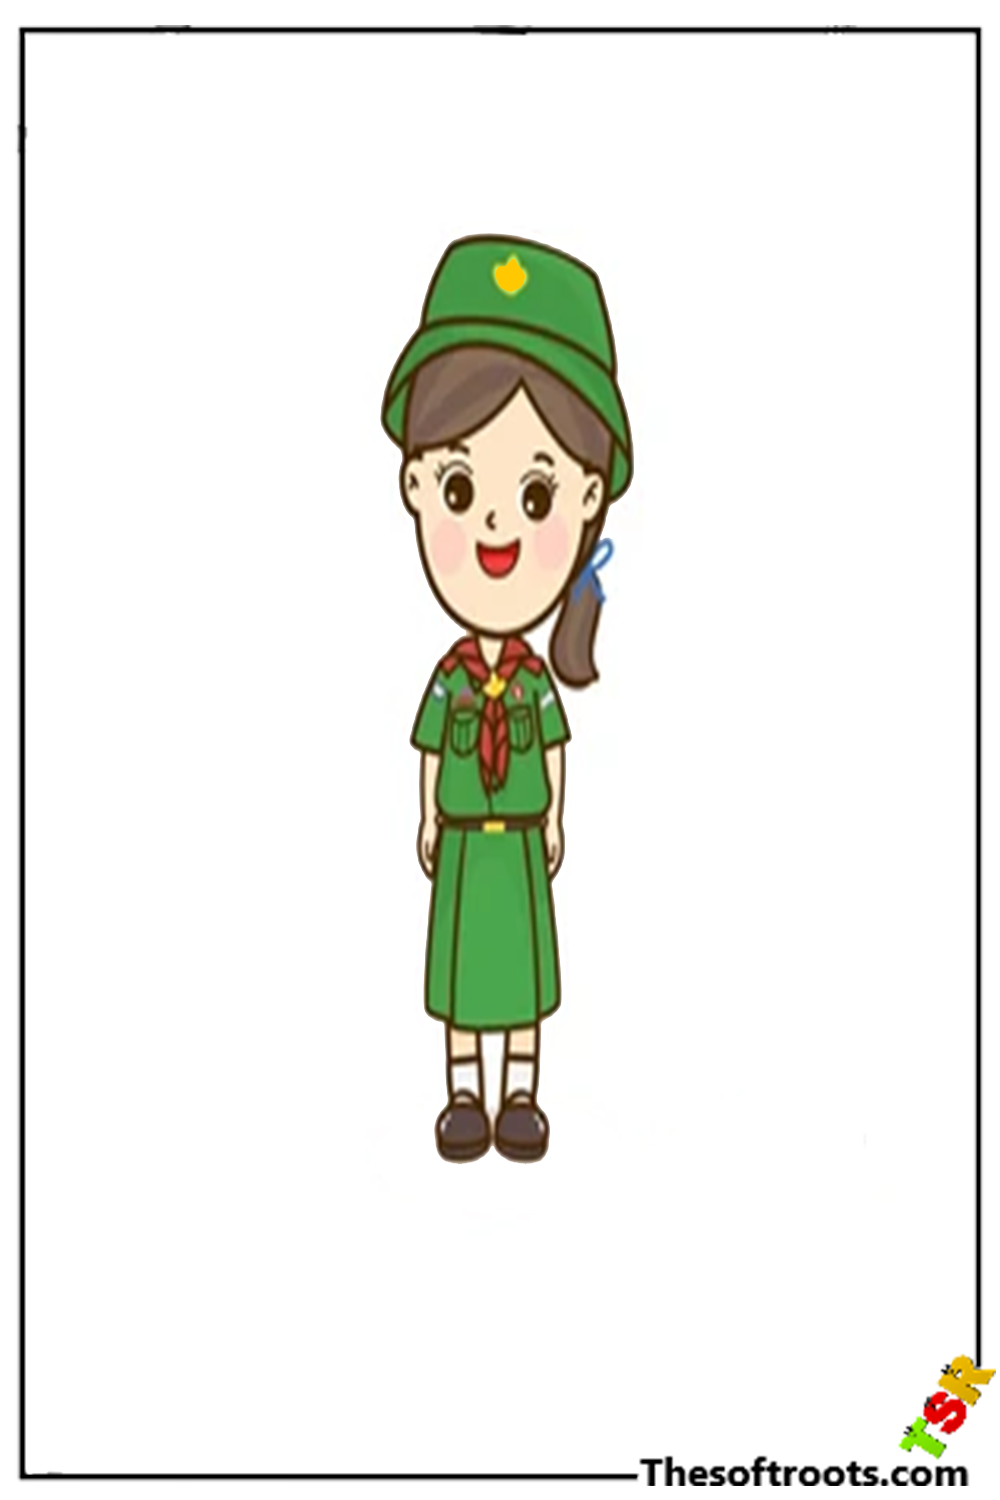 How to Draw Girl Scout Drawing Step by Step